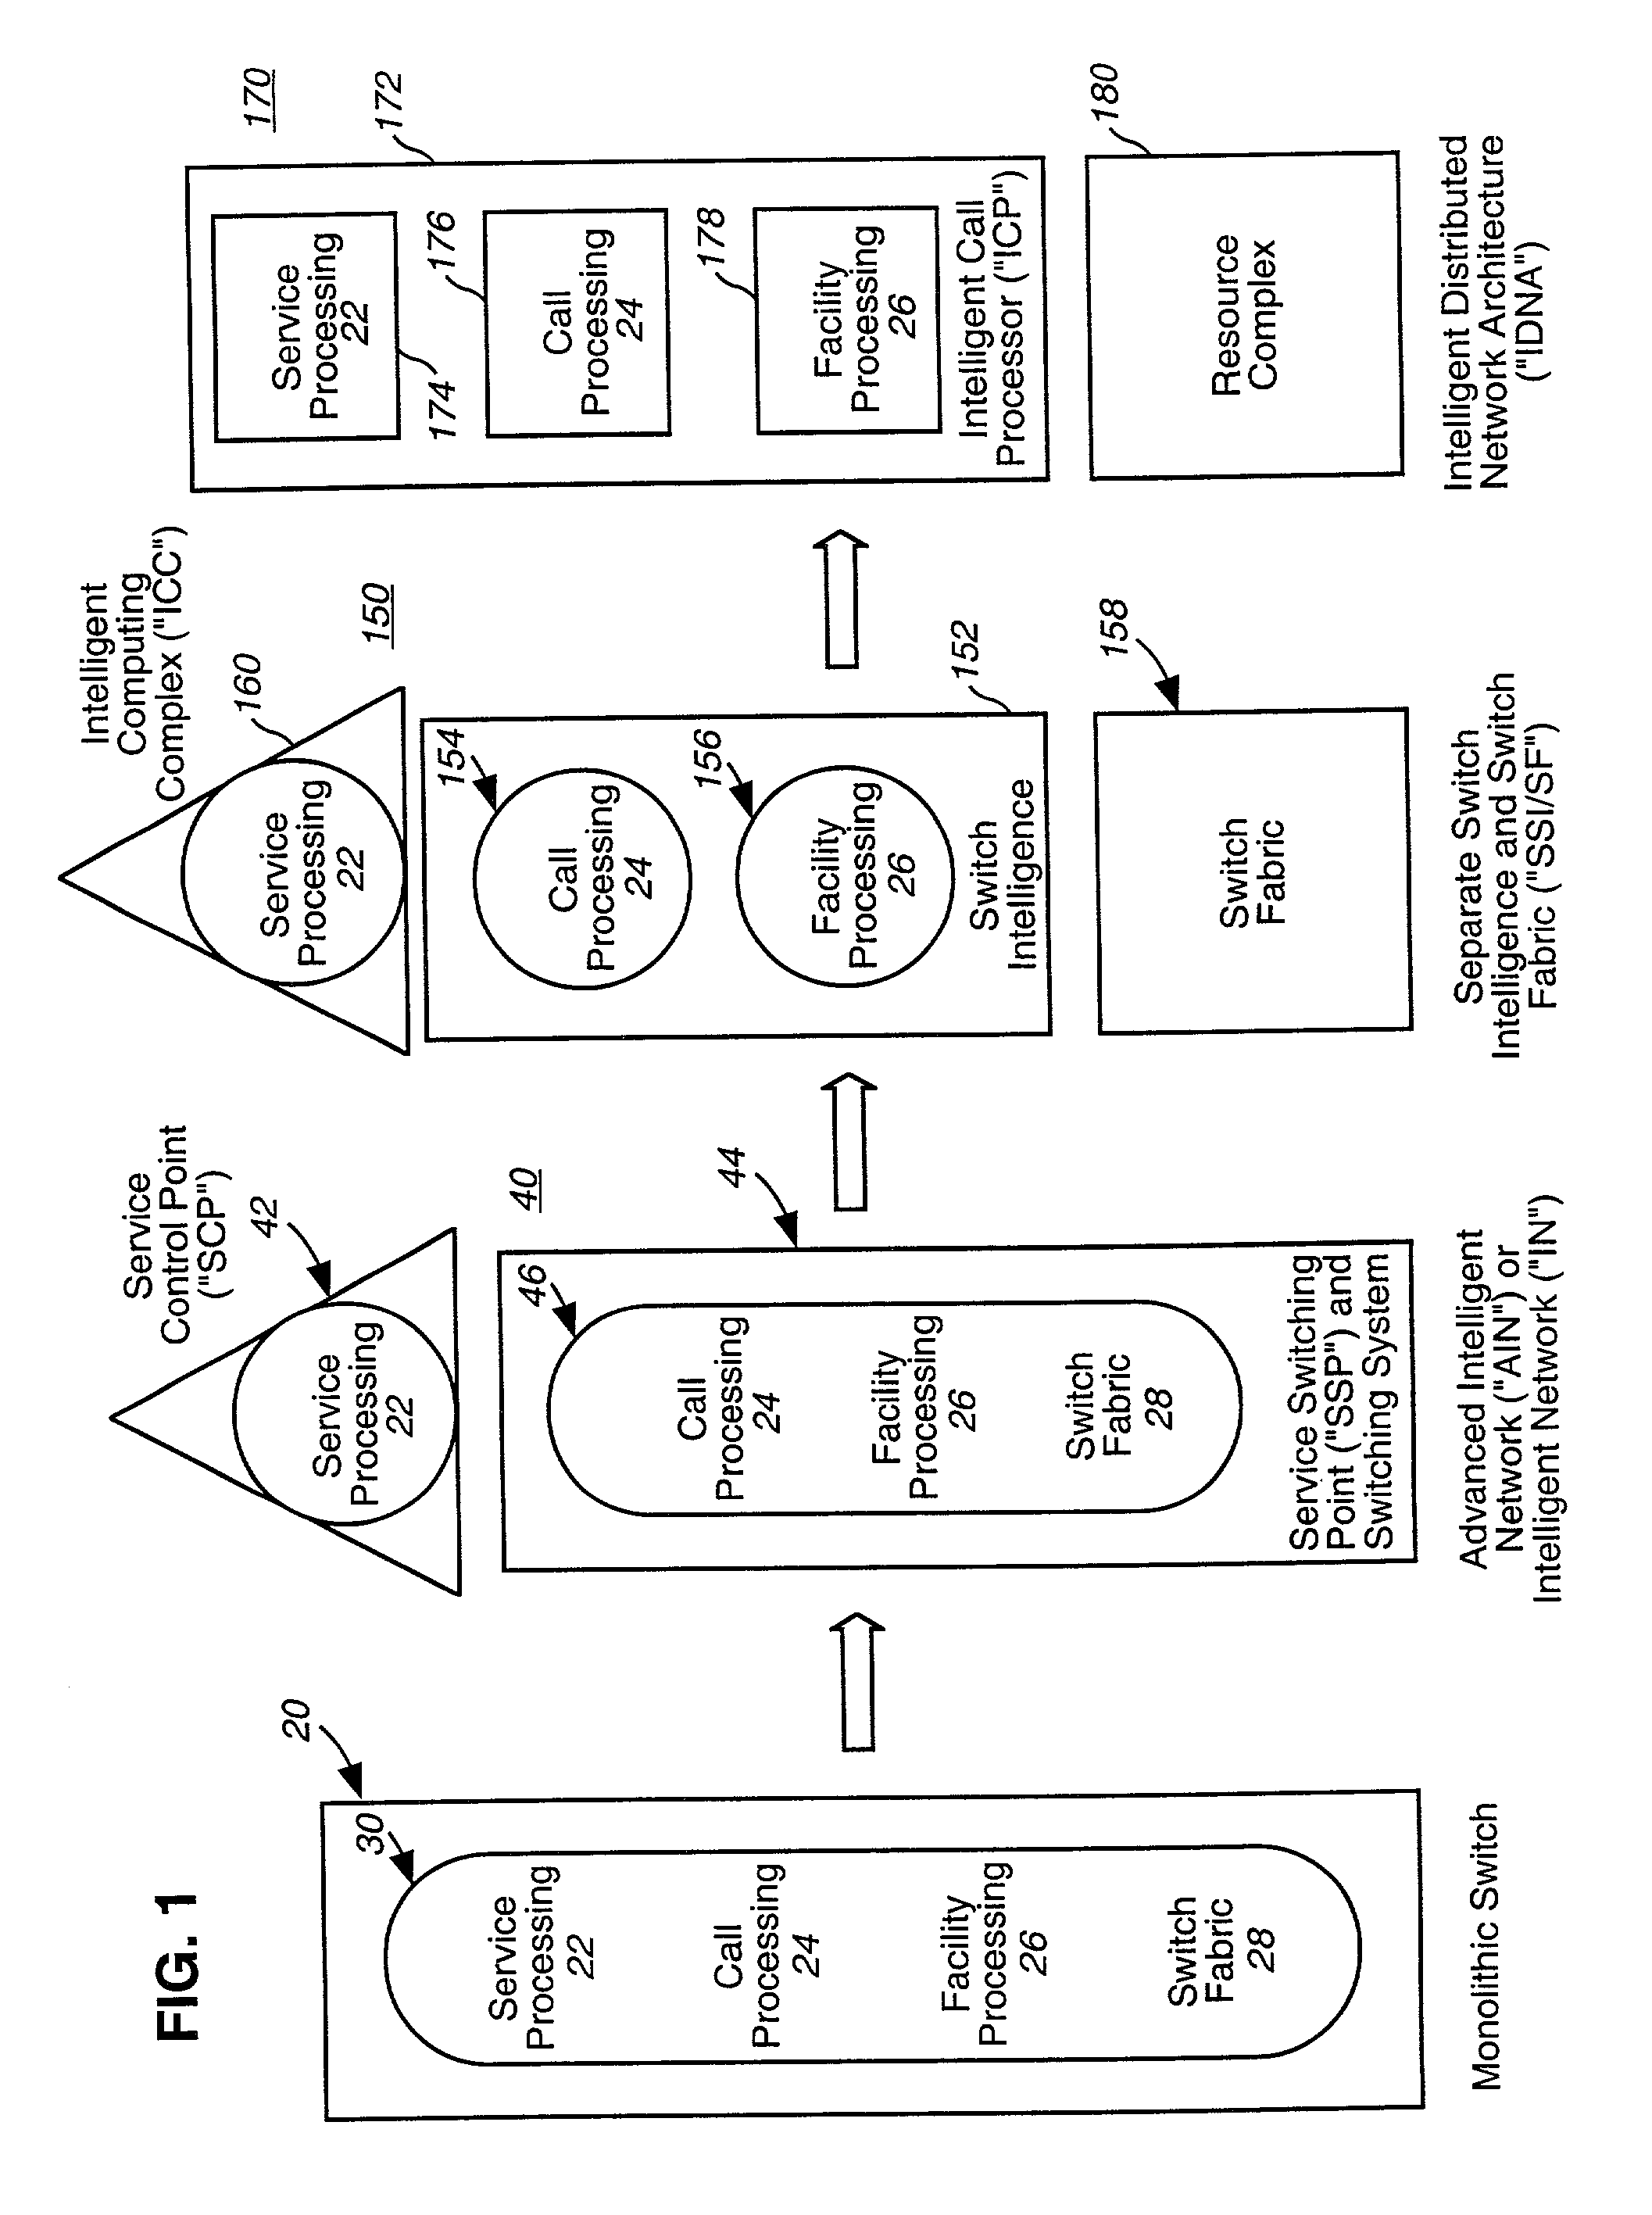 Method and apparatus for managing local resources at service nodes in an intelligent network